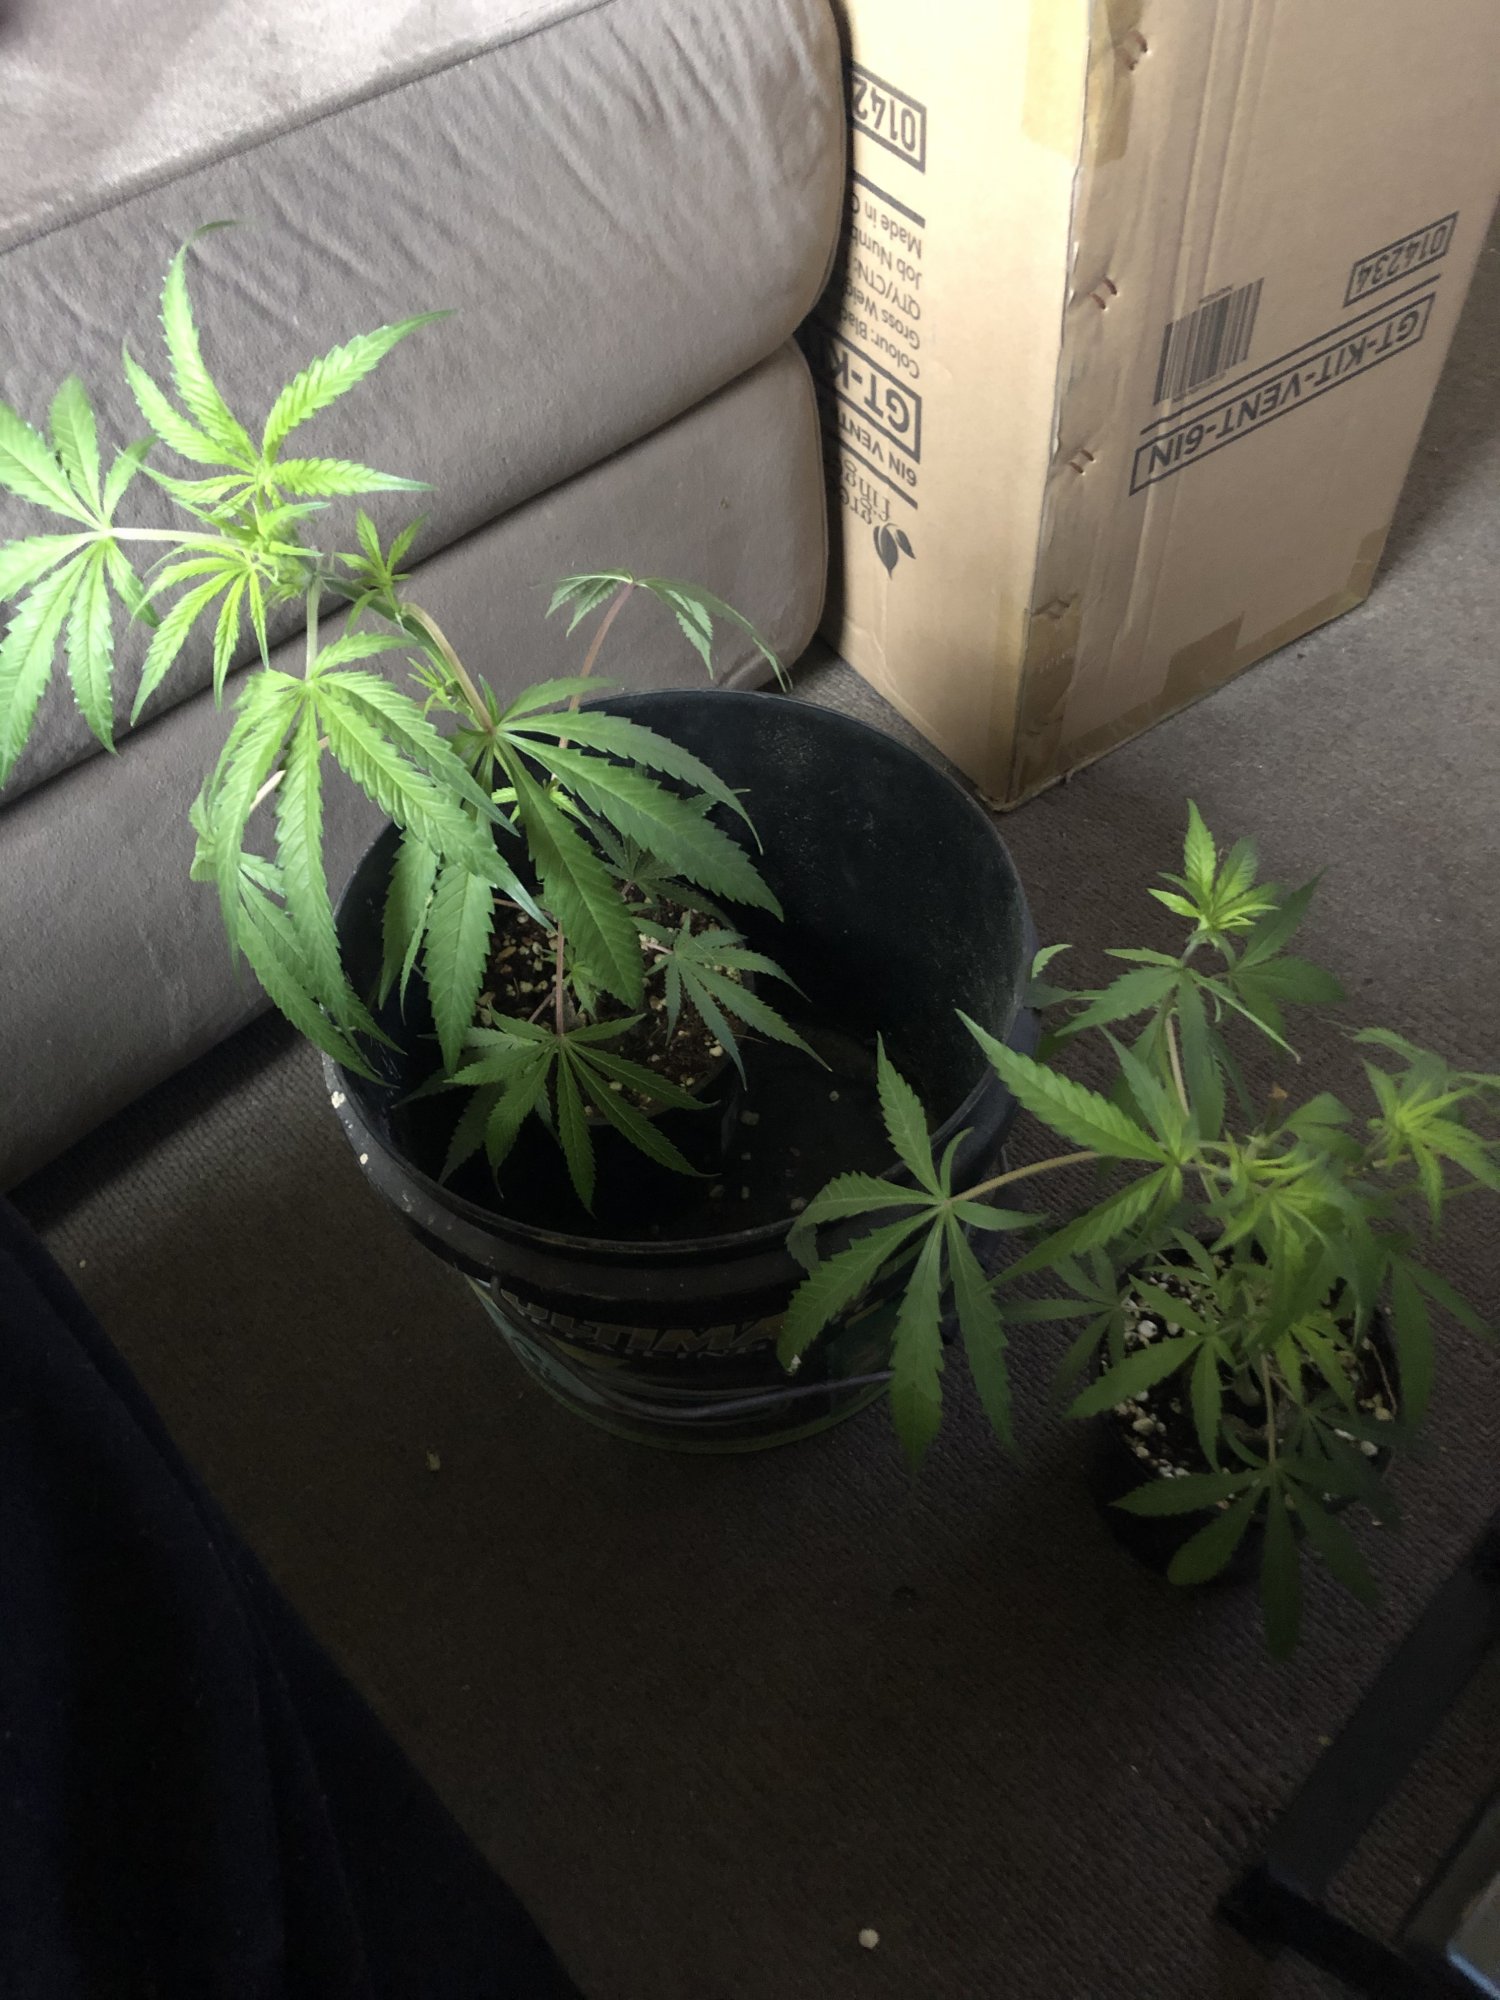 The unknown clones from a buddy